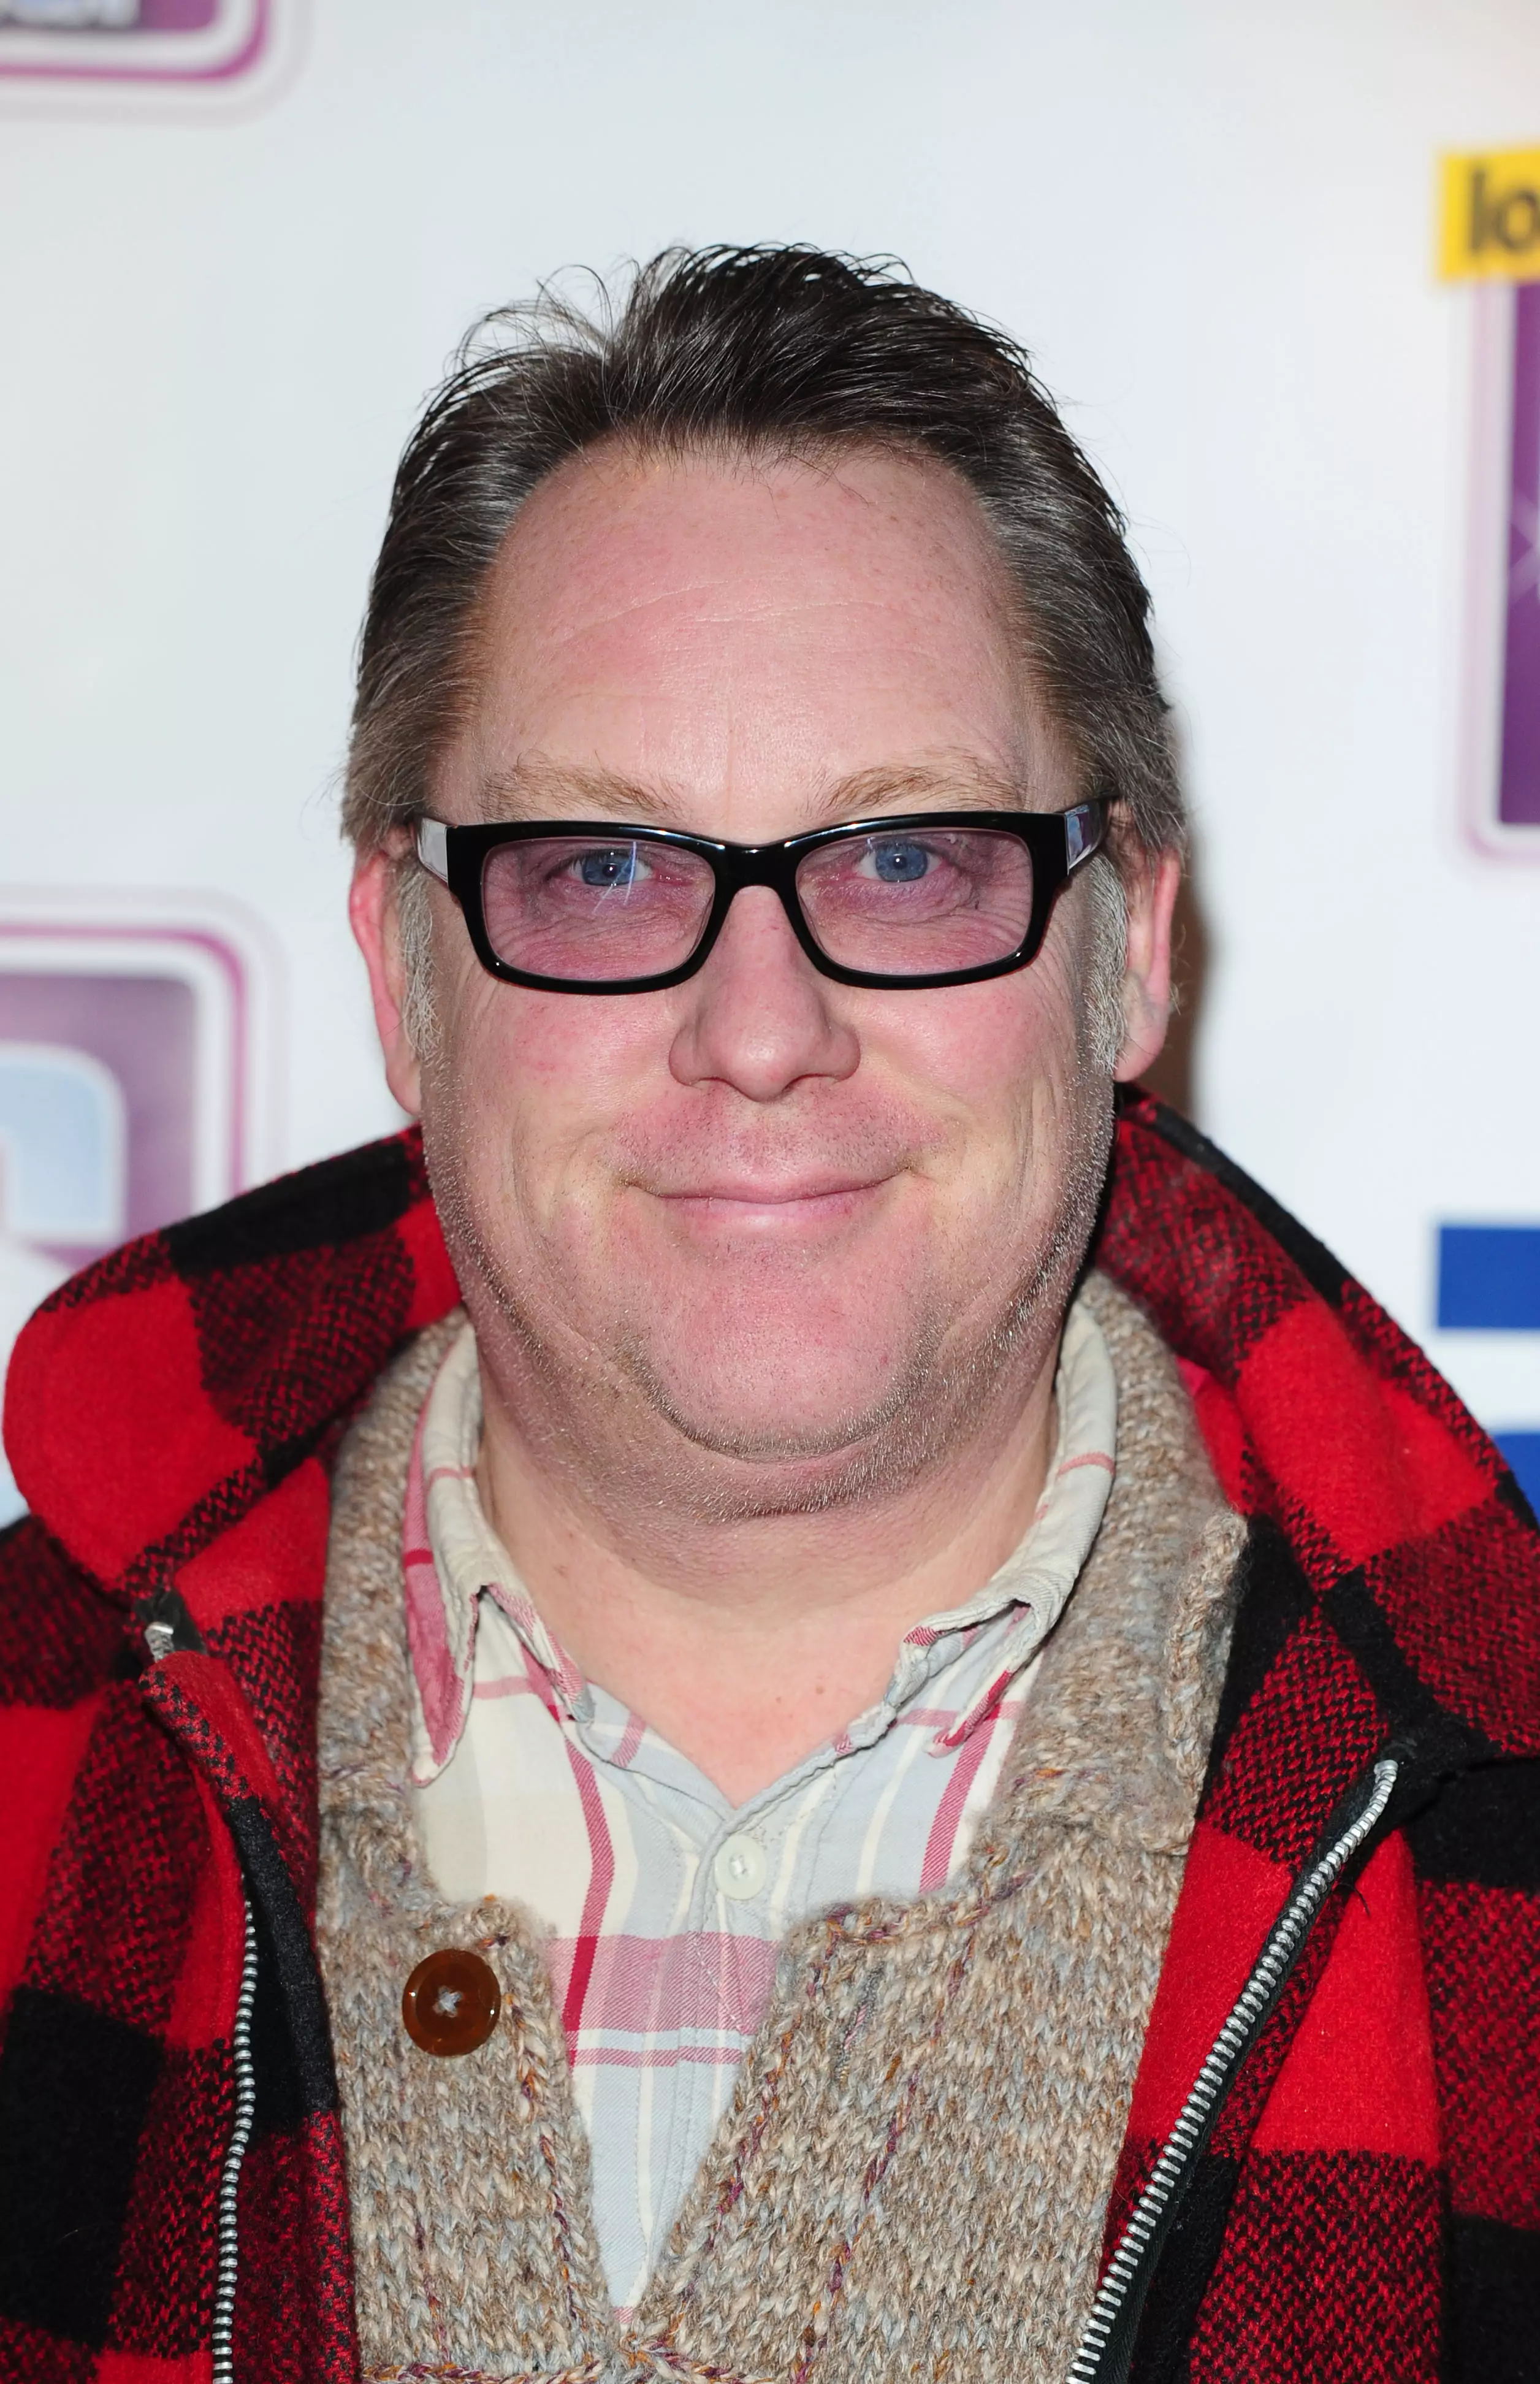 Vic Reeves is set to host (